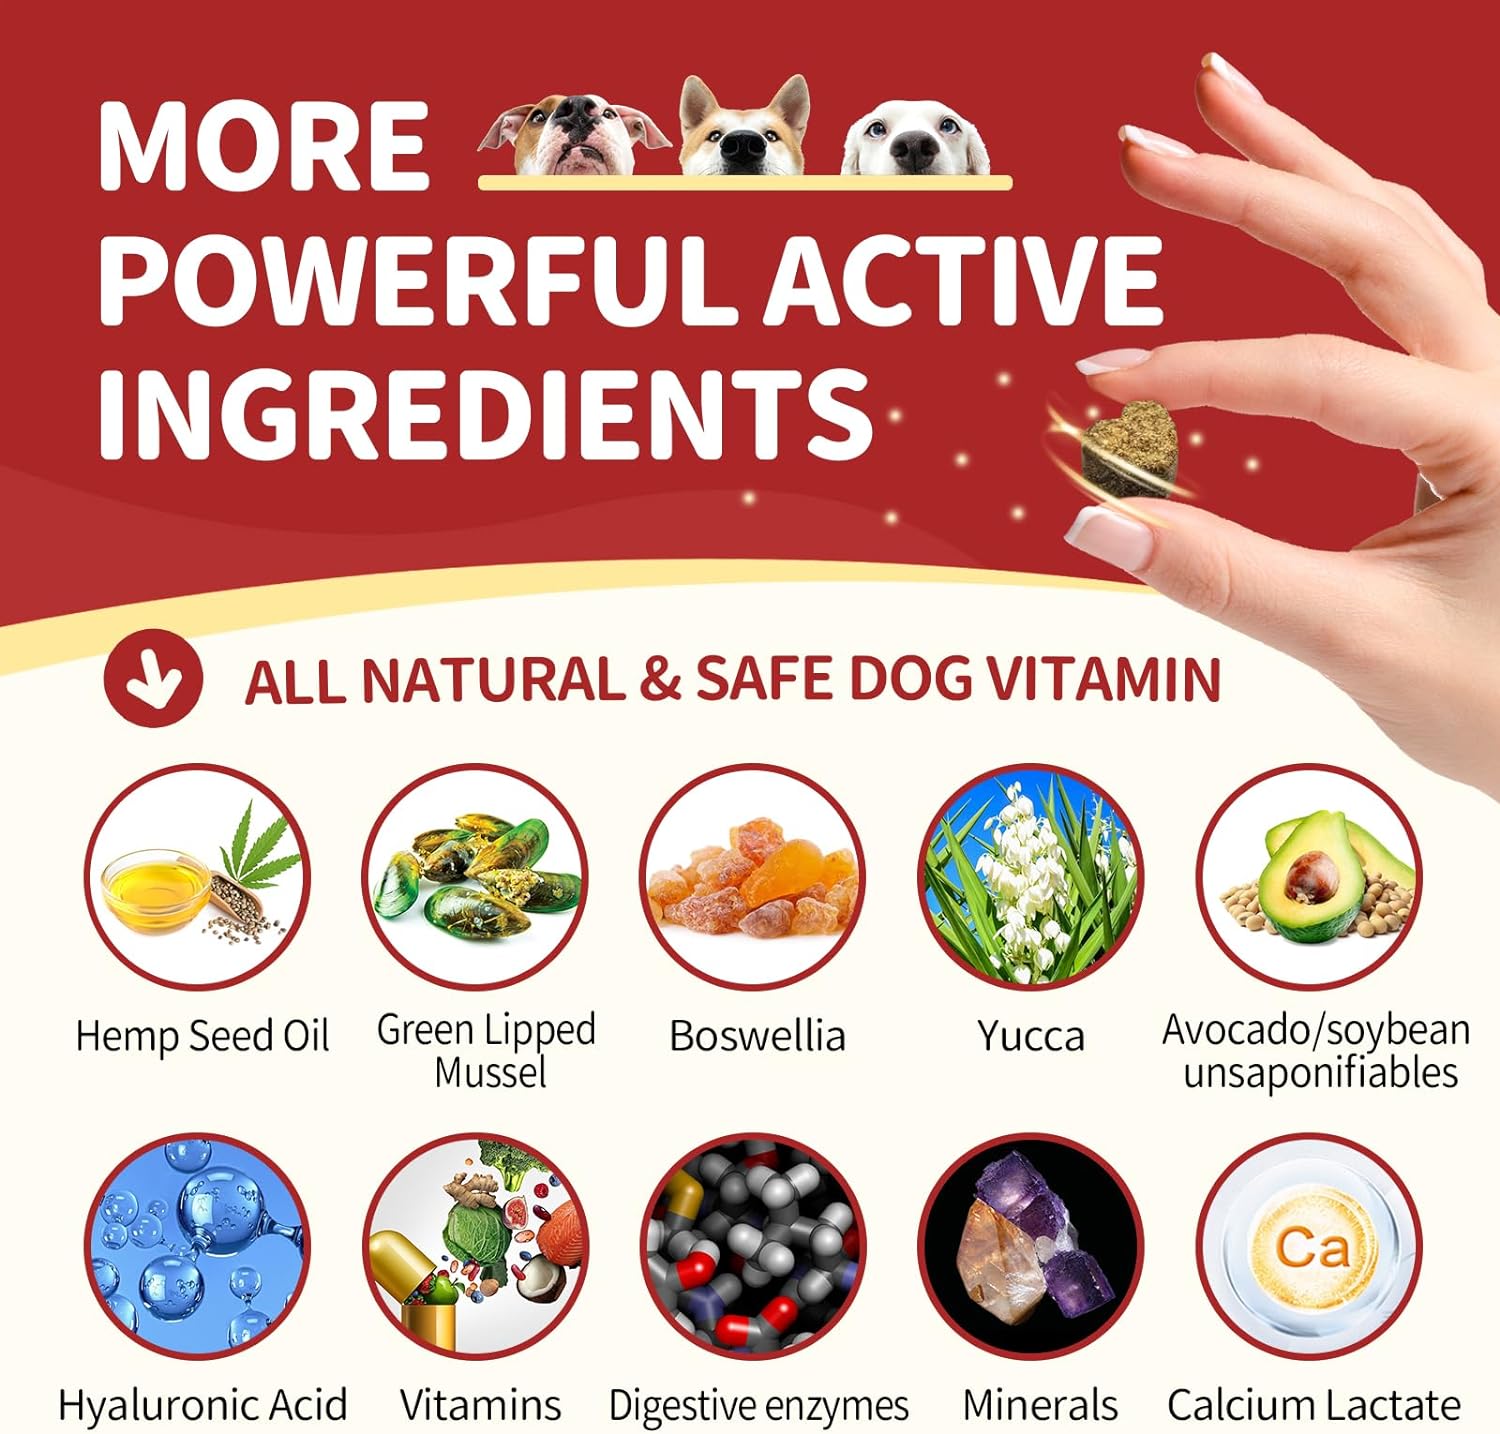 Glucosamine chewable tablets for dogs with more powerful active ingredients